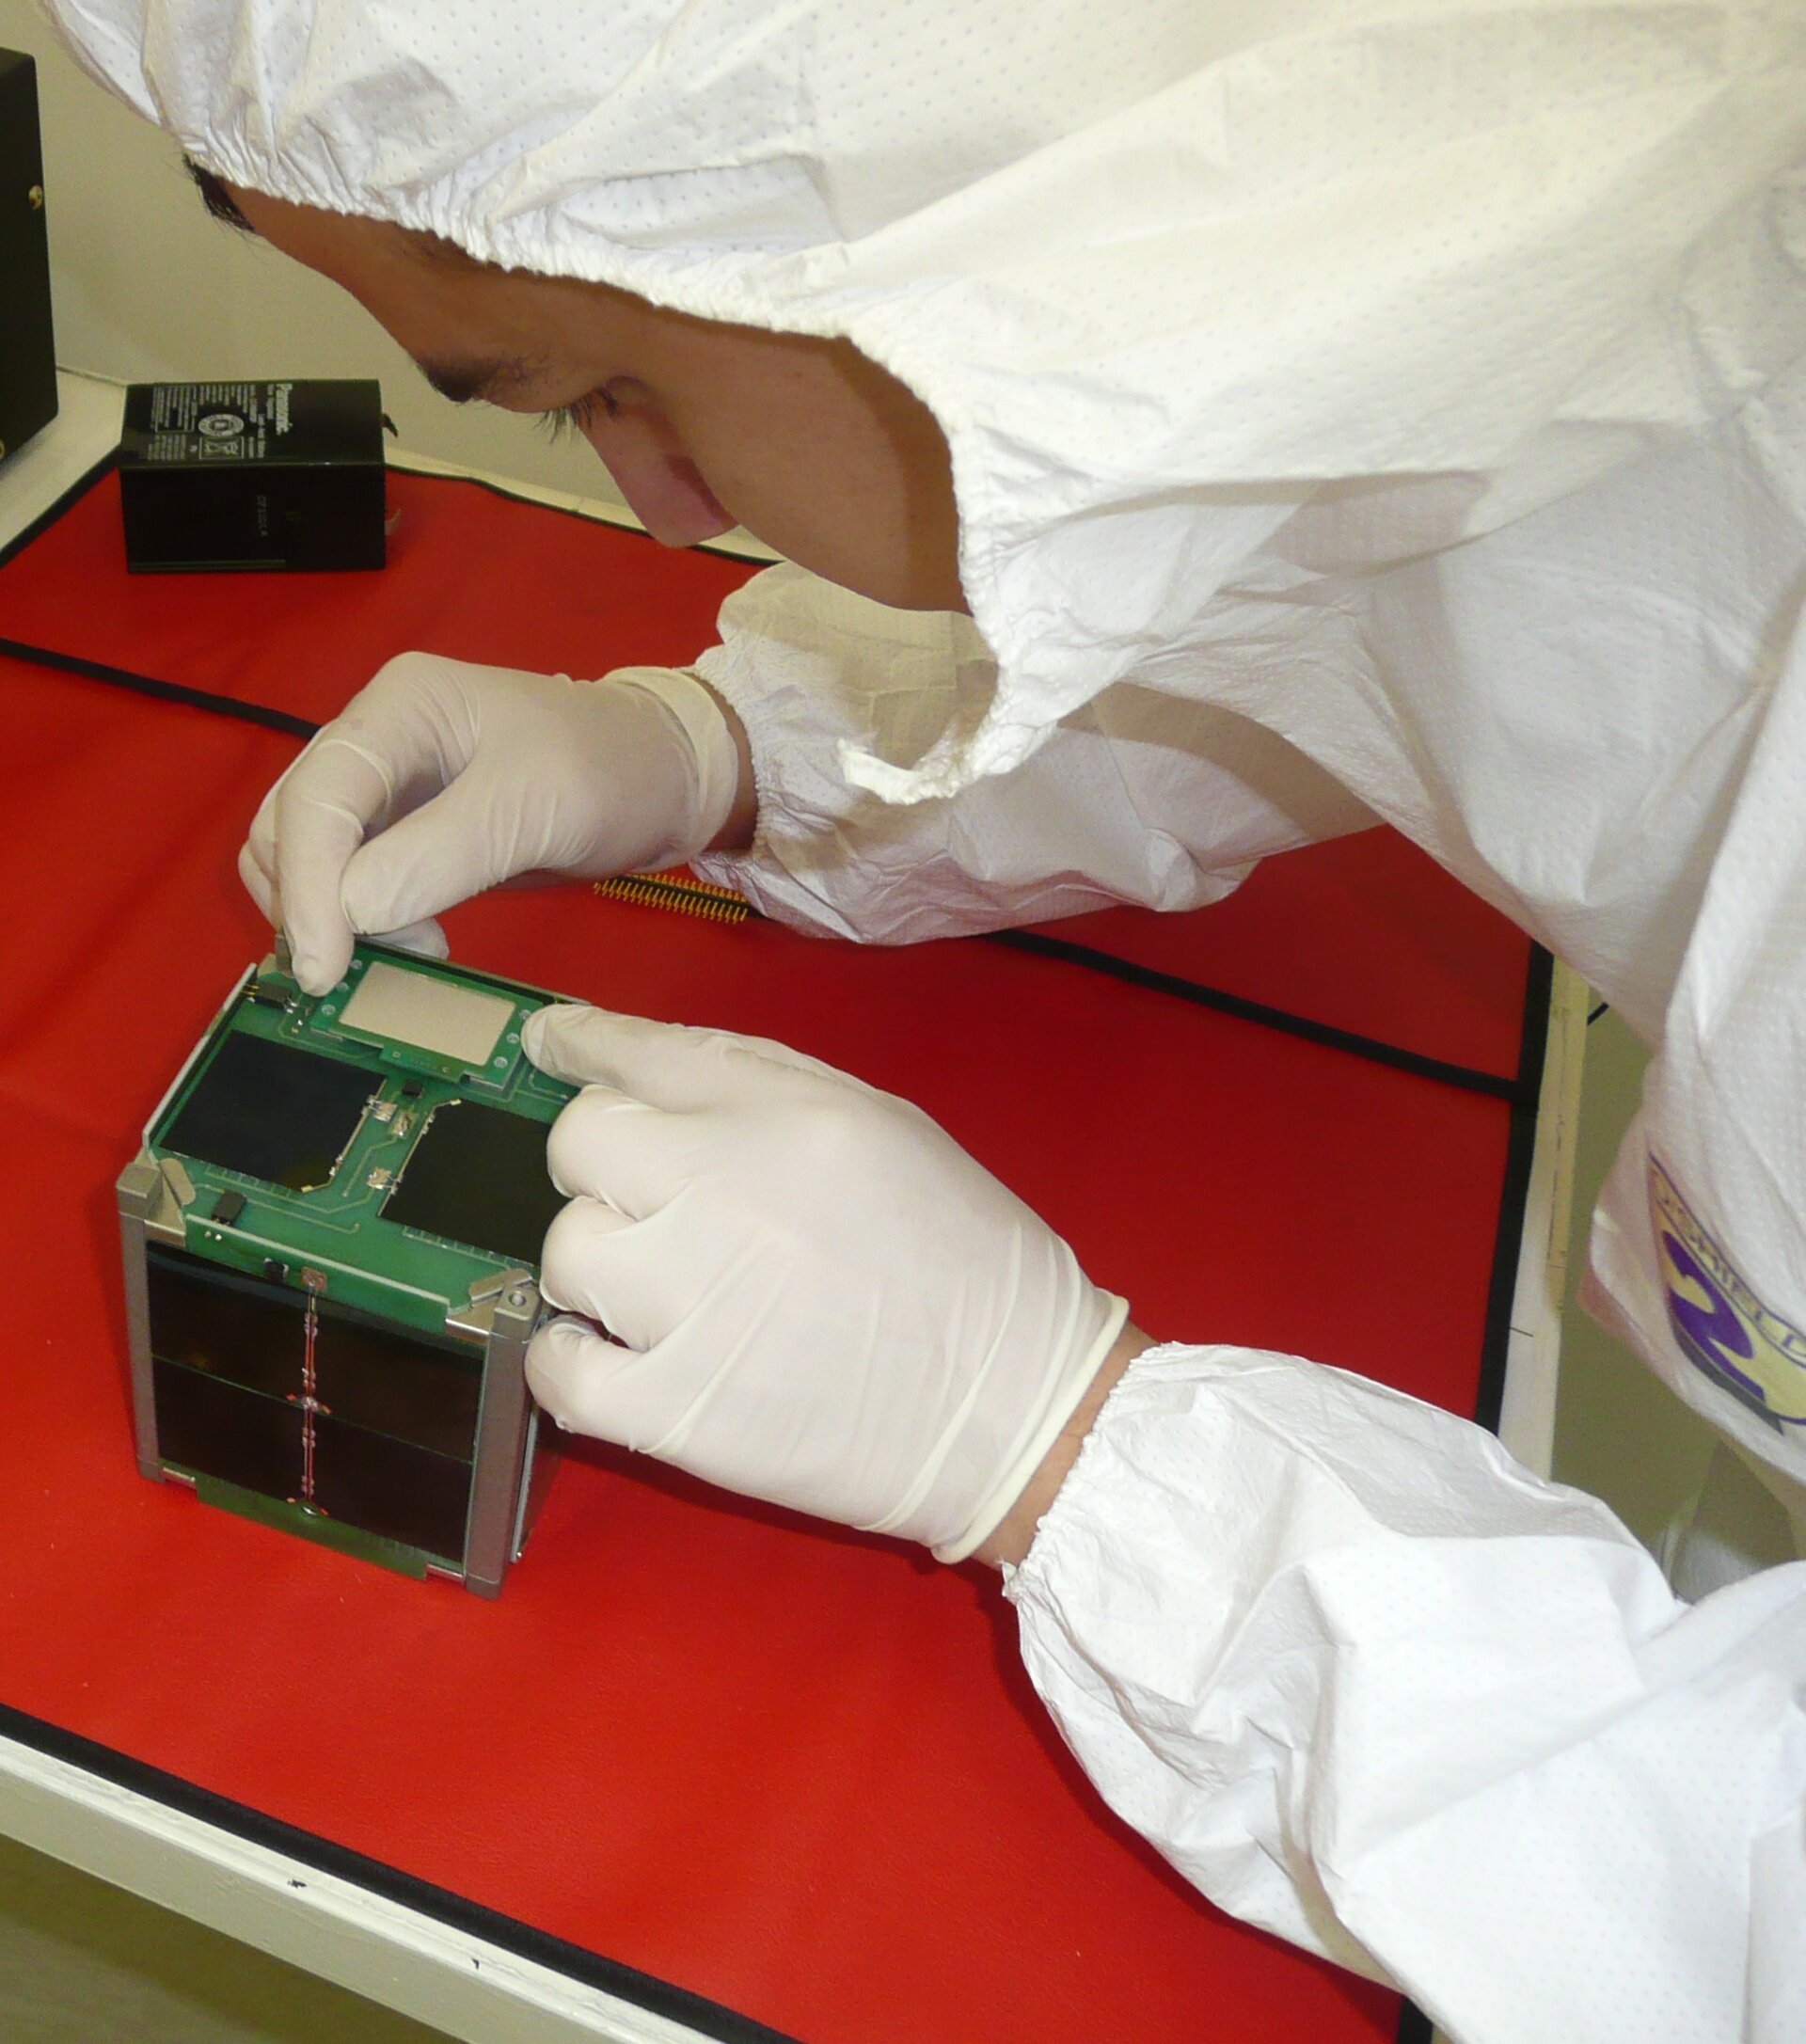 Piezo impact sensor is mounted on the –Z face of the cube